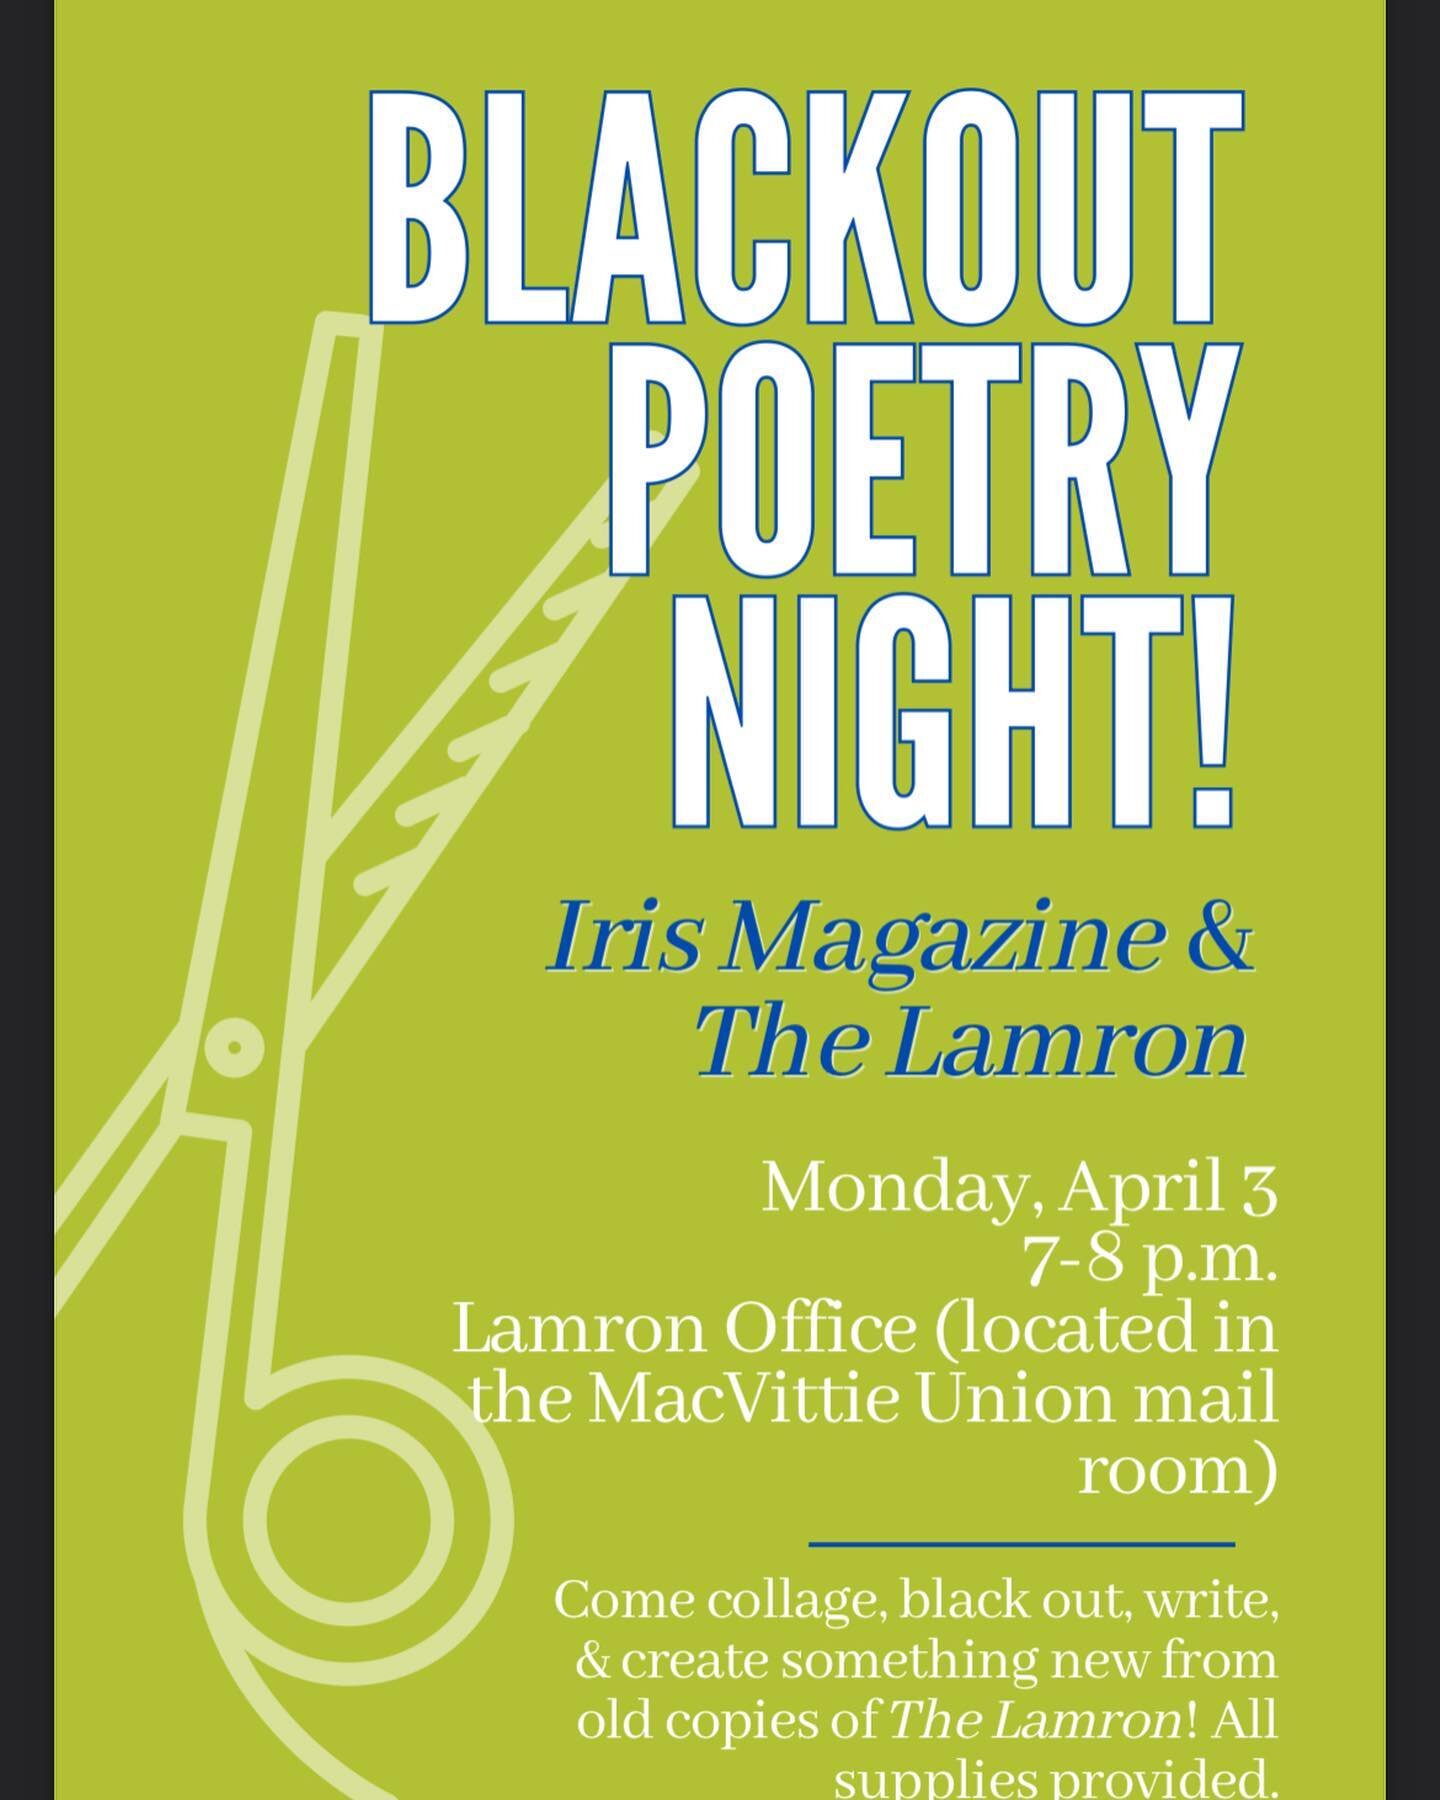 YES IT&rsquo;S TRUE! For the first time in years we are holding an event where you can come express yourself! 

@iirismaag will be there too! So come enjoy some relaxing time to collage and create with old Lamron Newspapers